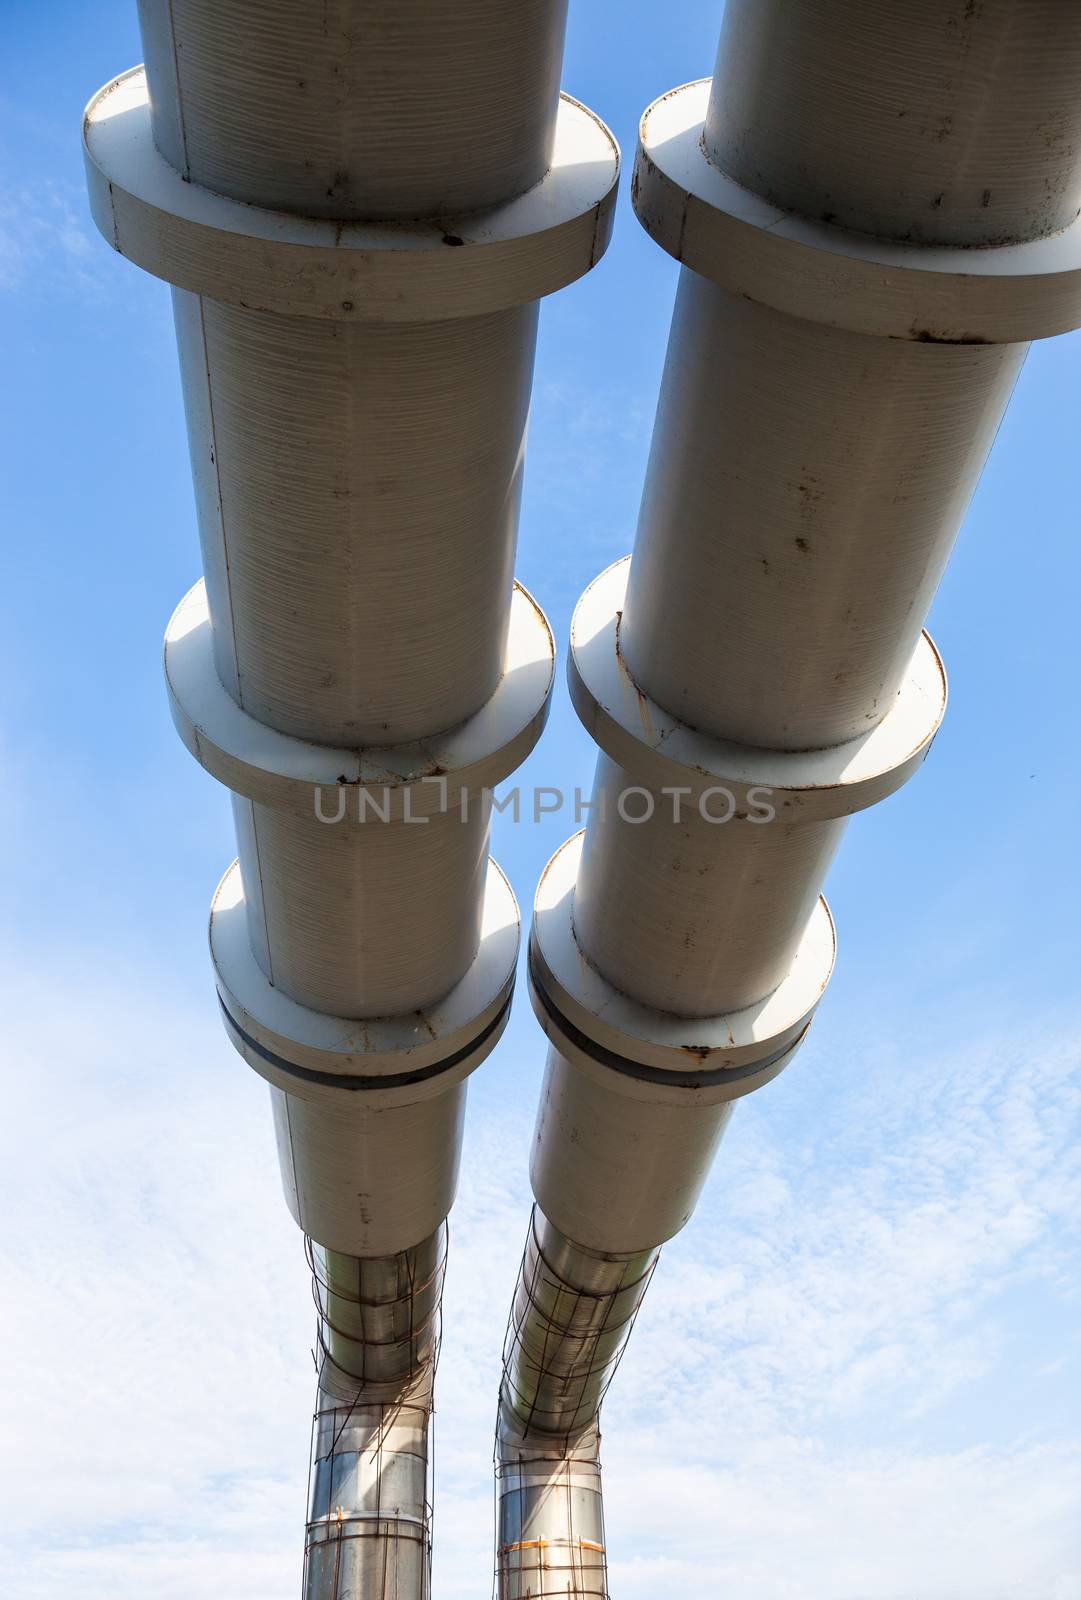 Elevated section of the pipelines against the blue sky